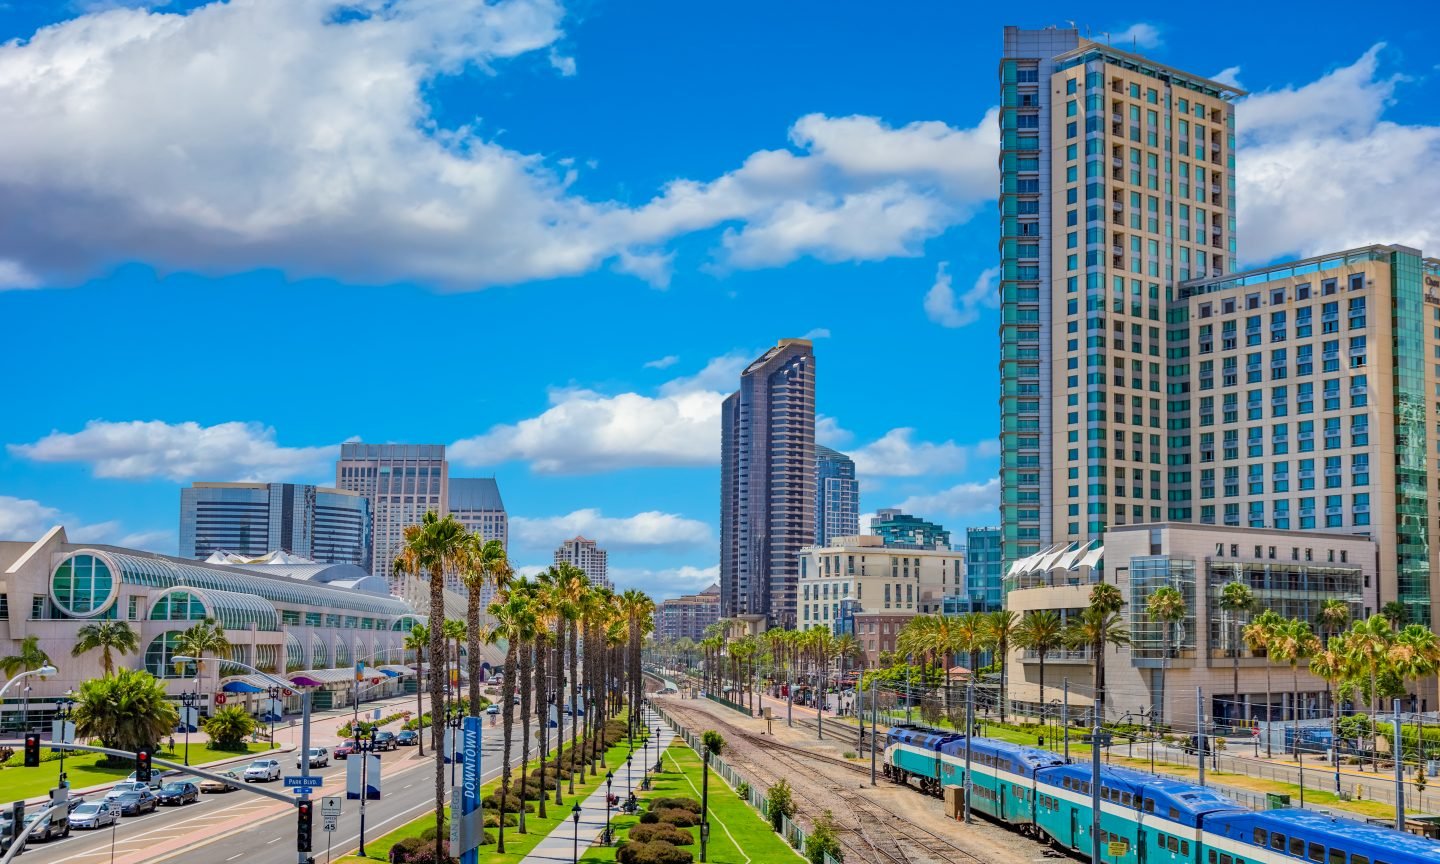 Cheapest Car Insurance in San Diego, CA for 2022 - NerdWallet